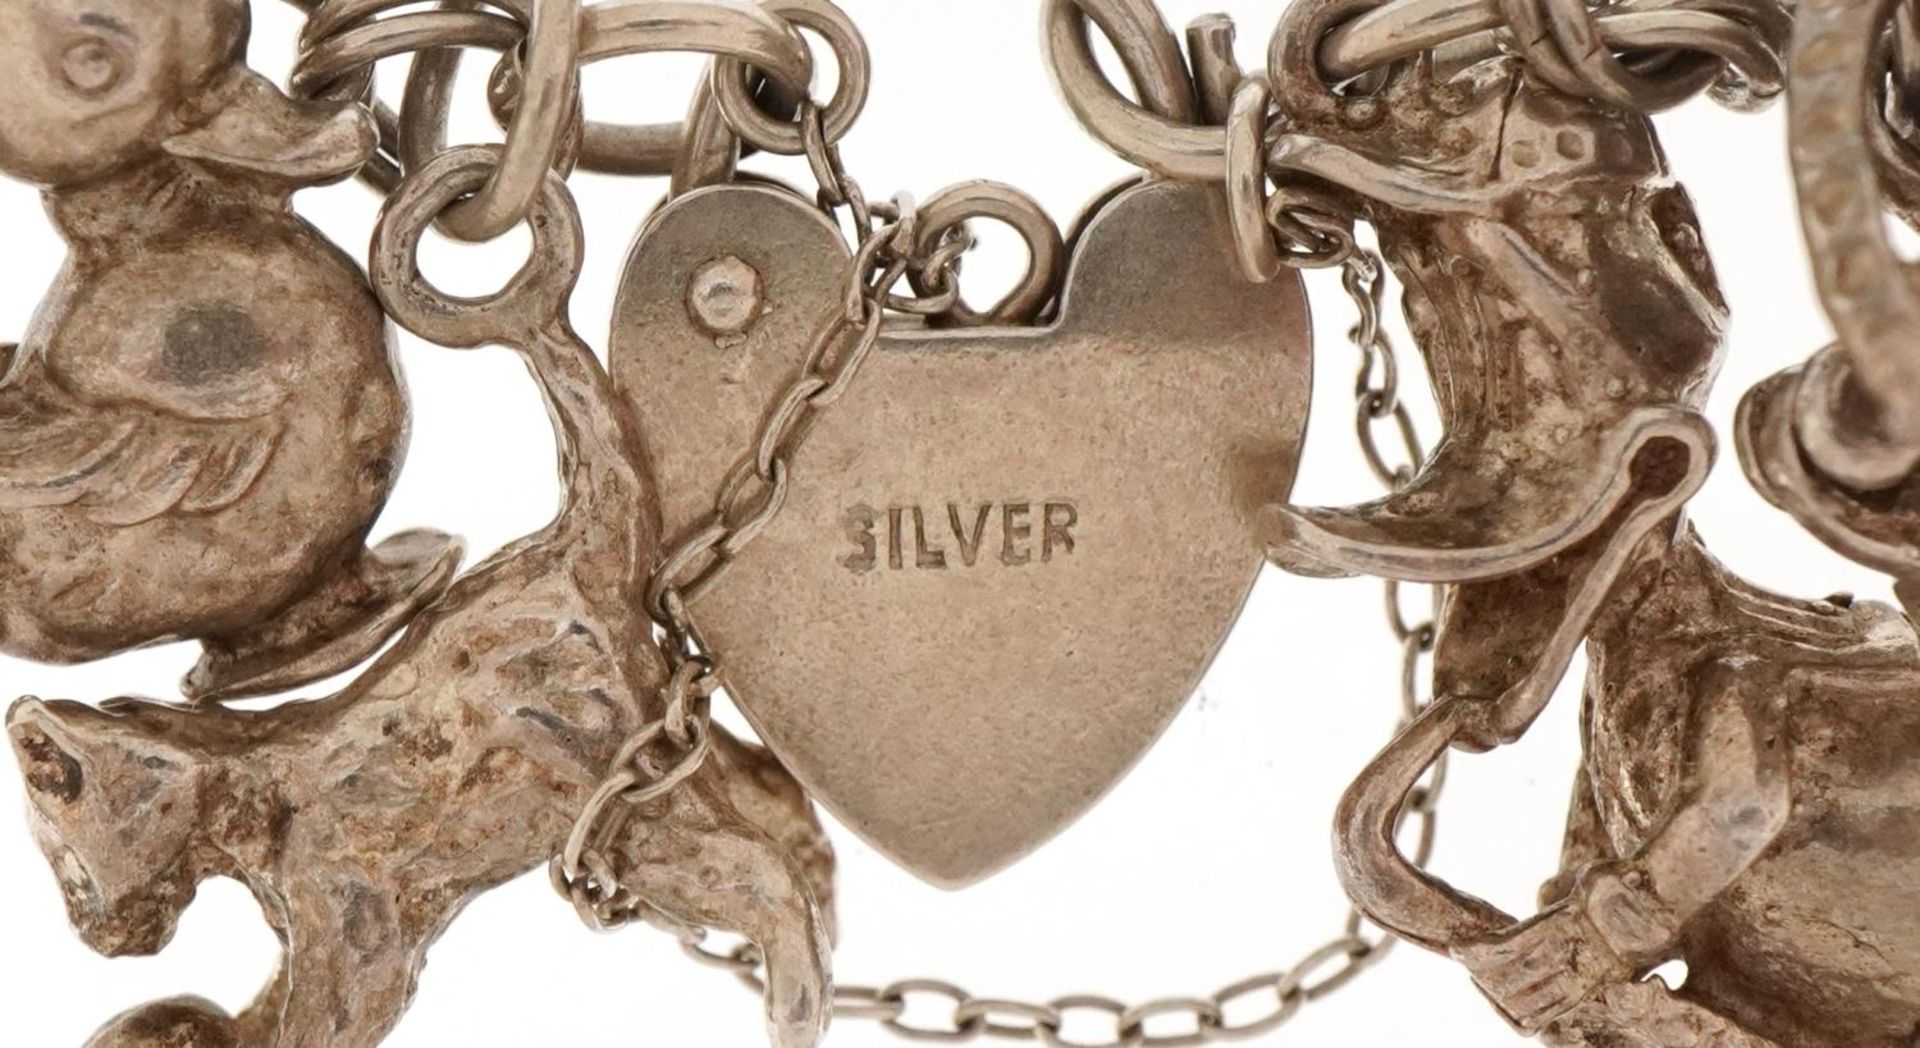 Silver charm bracelet with a large collection of mostly silver charms, 66.6g - Image 3 of 3